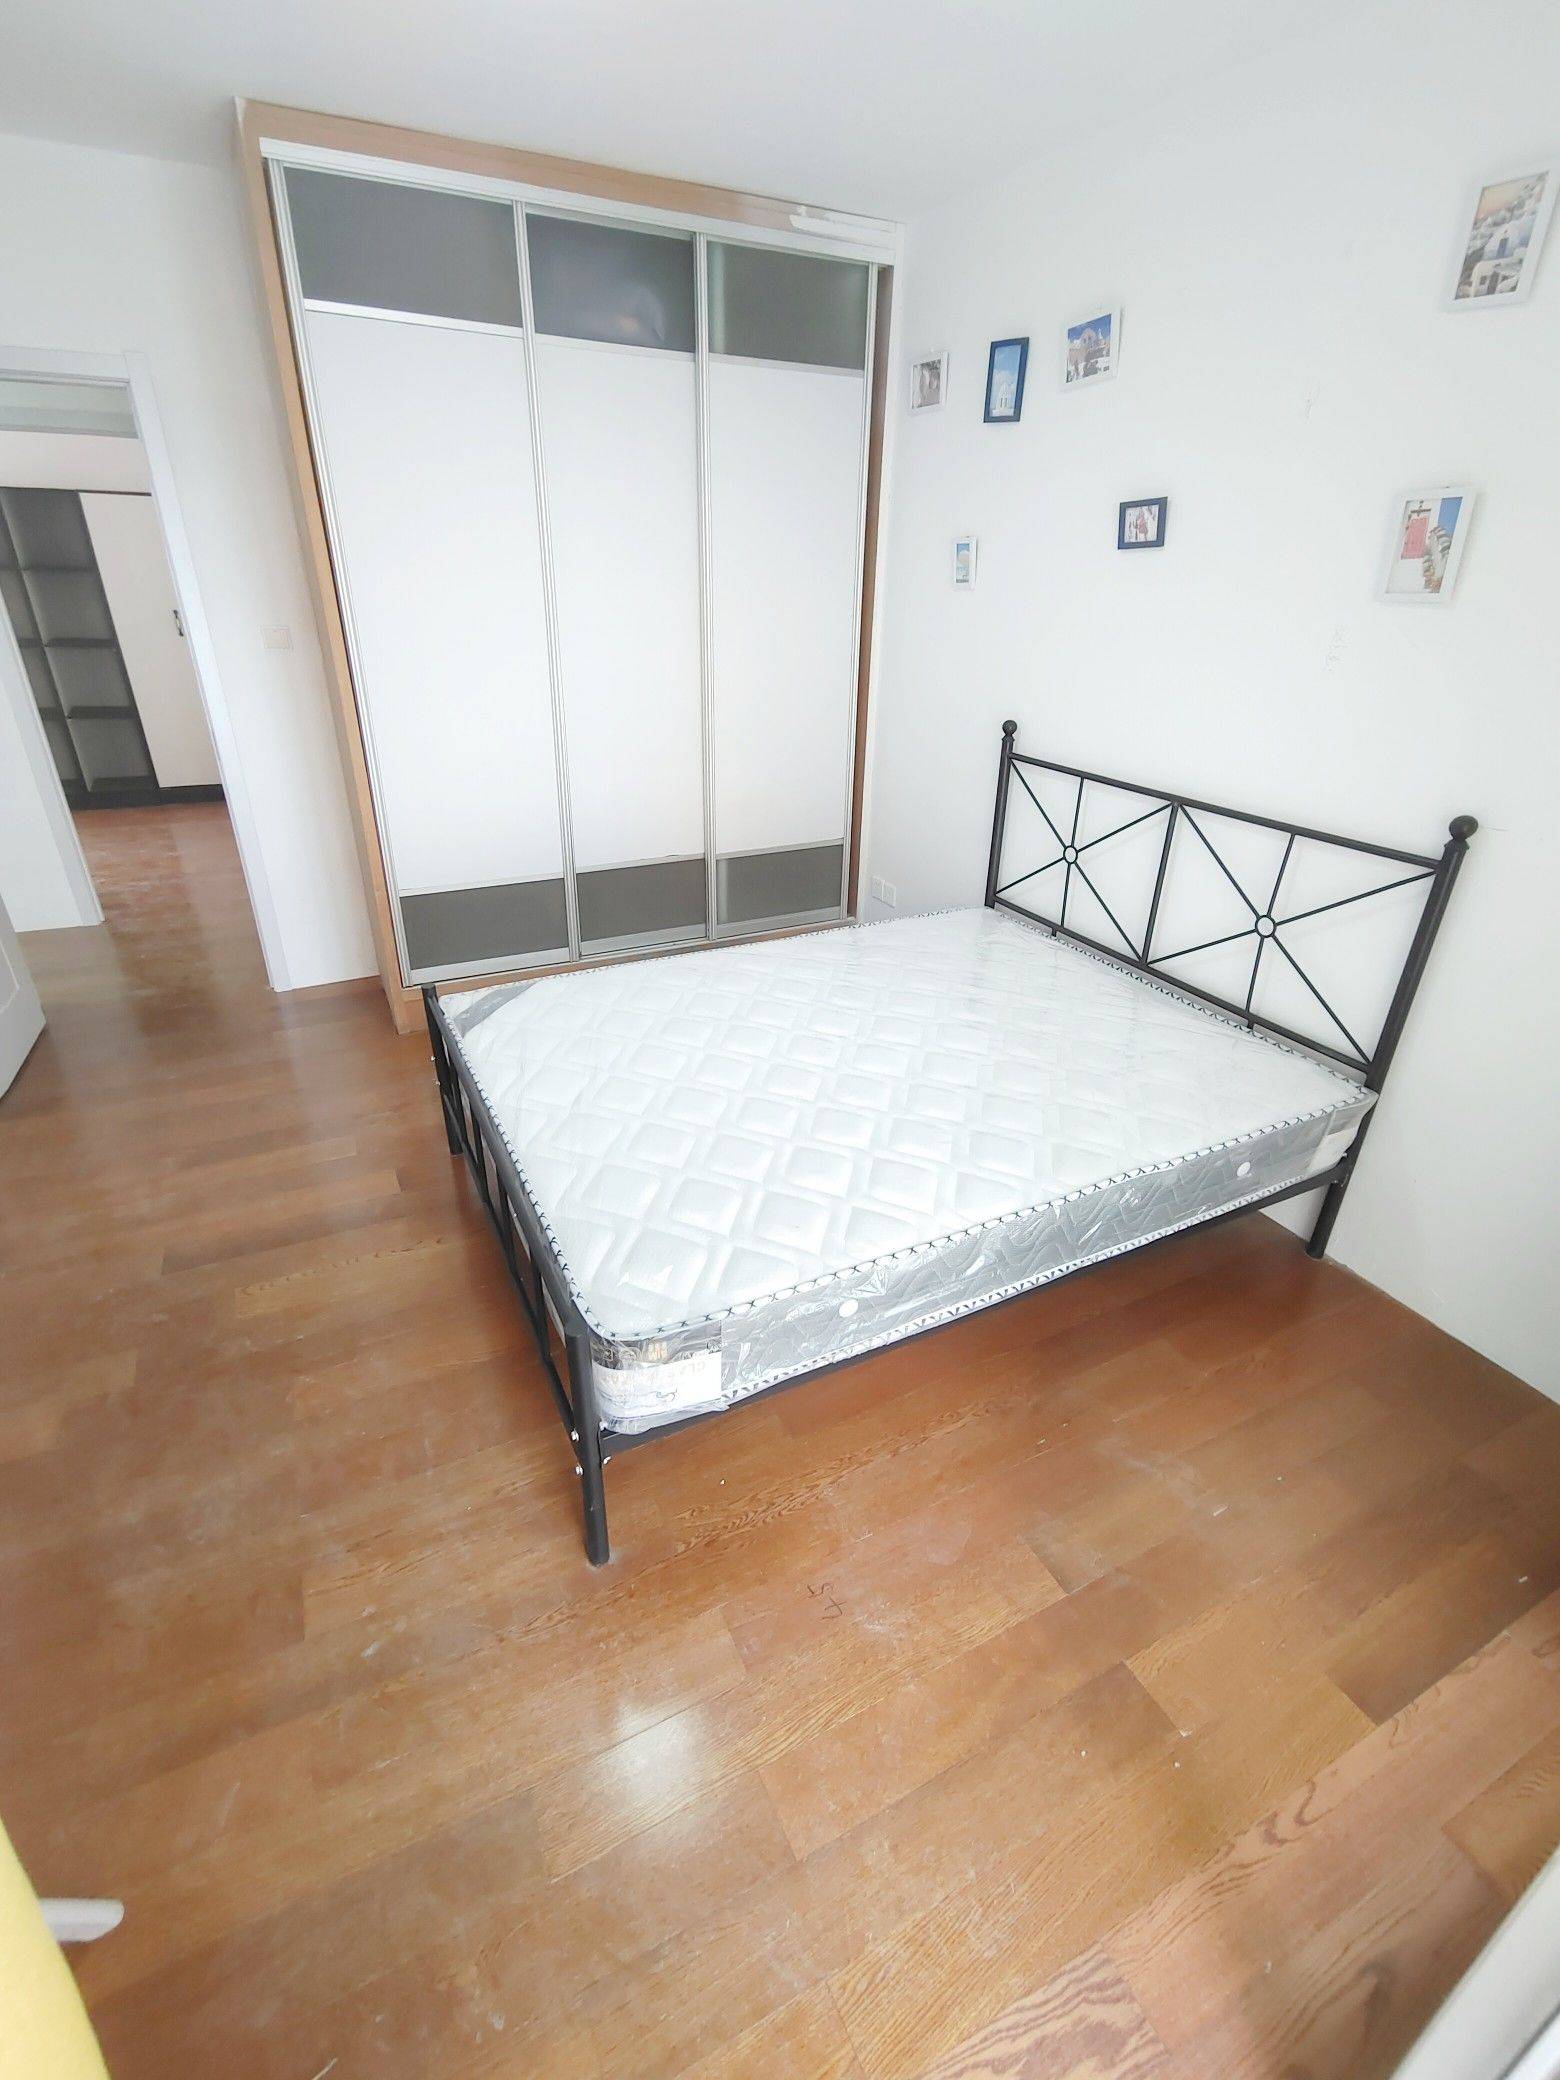 Nanjing-Yuhuatai-Cozy Home,Clean&Comfy,Chilled